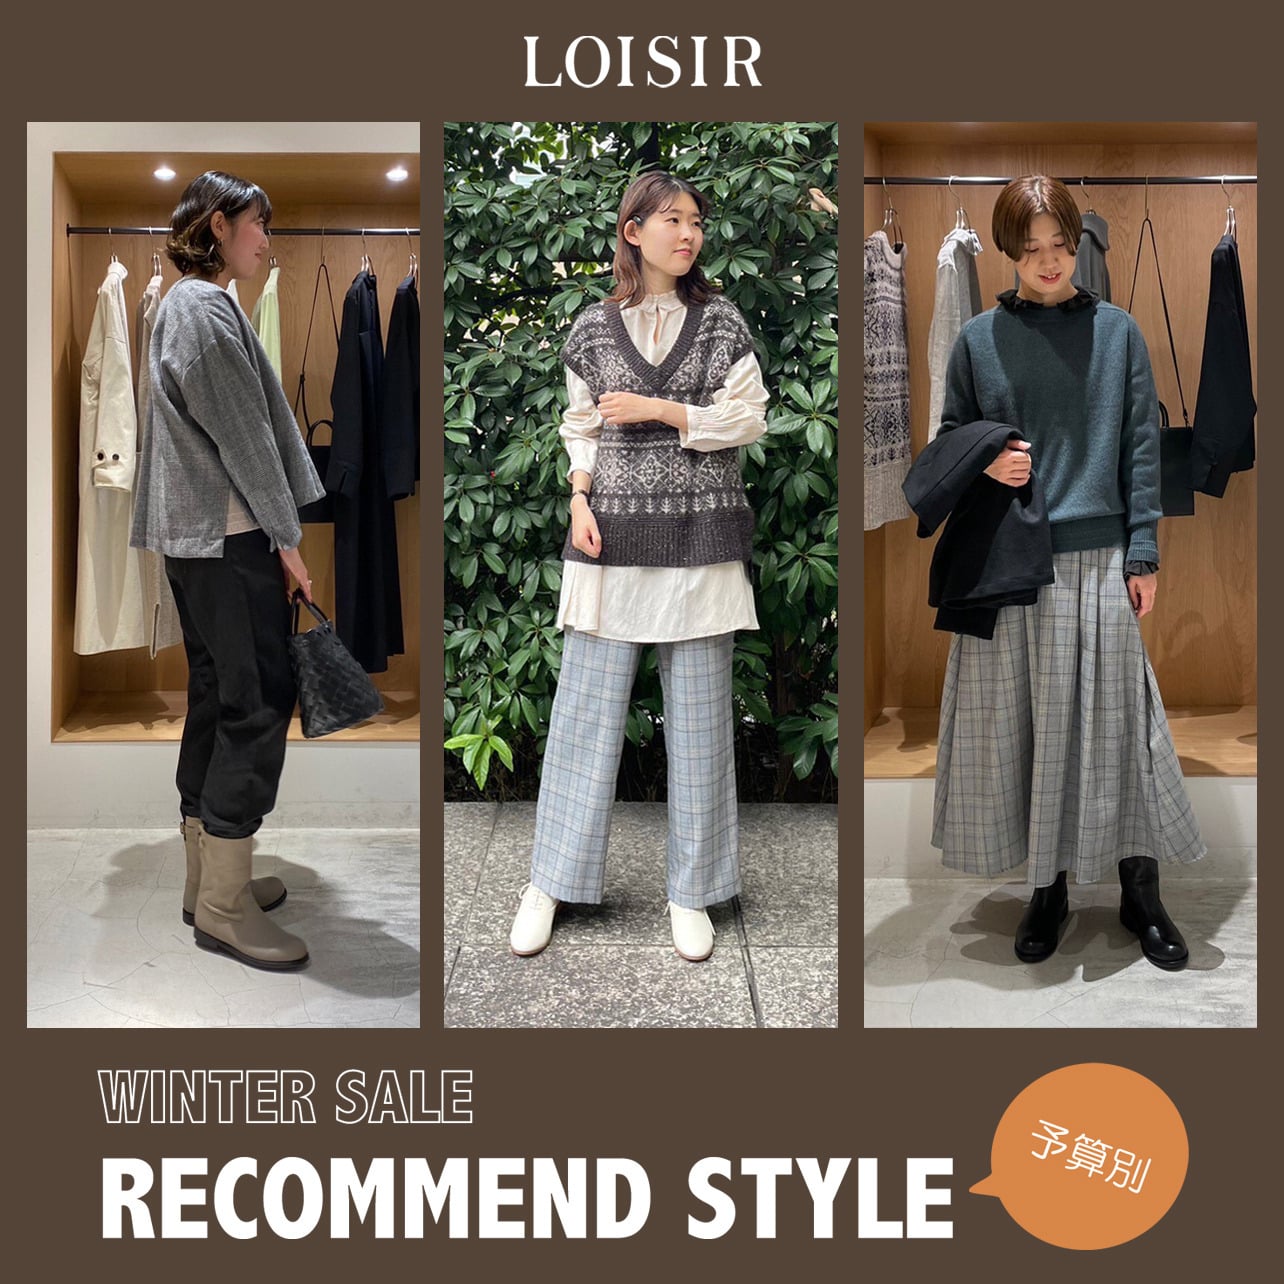 WINTER SALE RECOMMEND STYLE